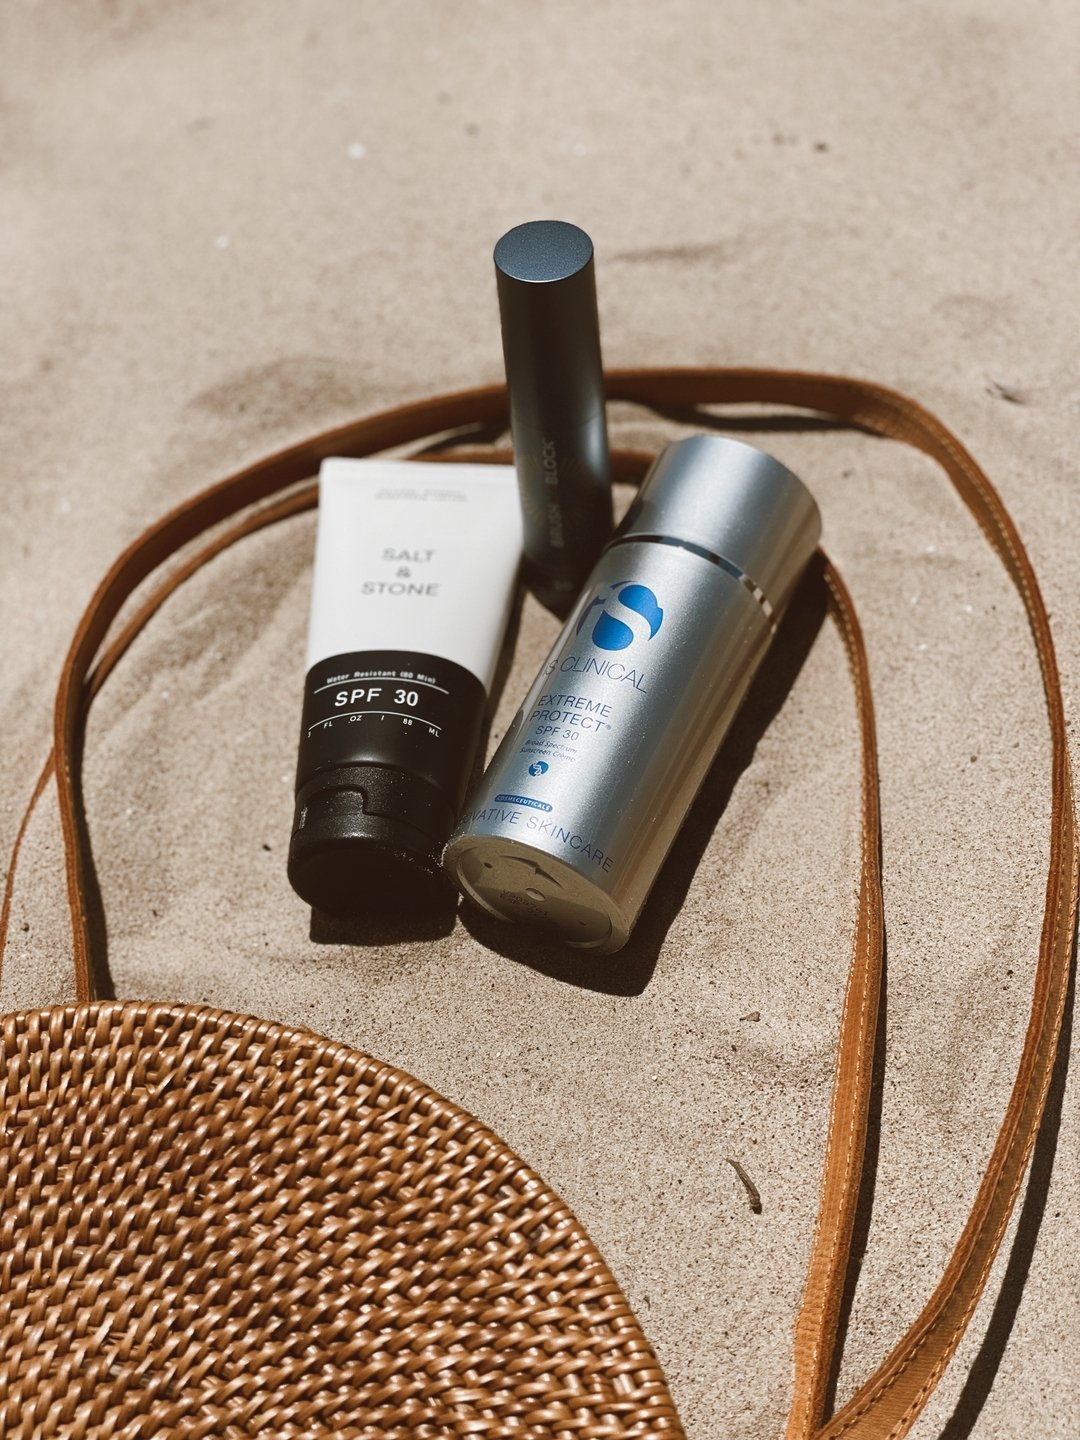 The month of May is skin cancer awareness month. With that being said, we here at Float cannot emphasize enough how important it is to wear SPF daily especially on our faces. Here are some benefits to applying SPF daily:

-Reduces your risk of skin c